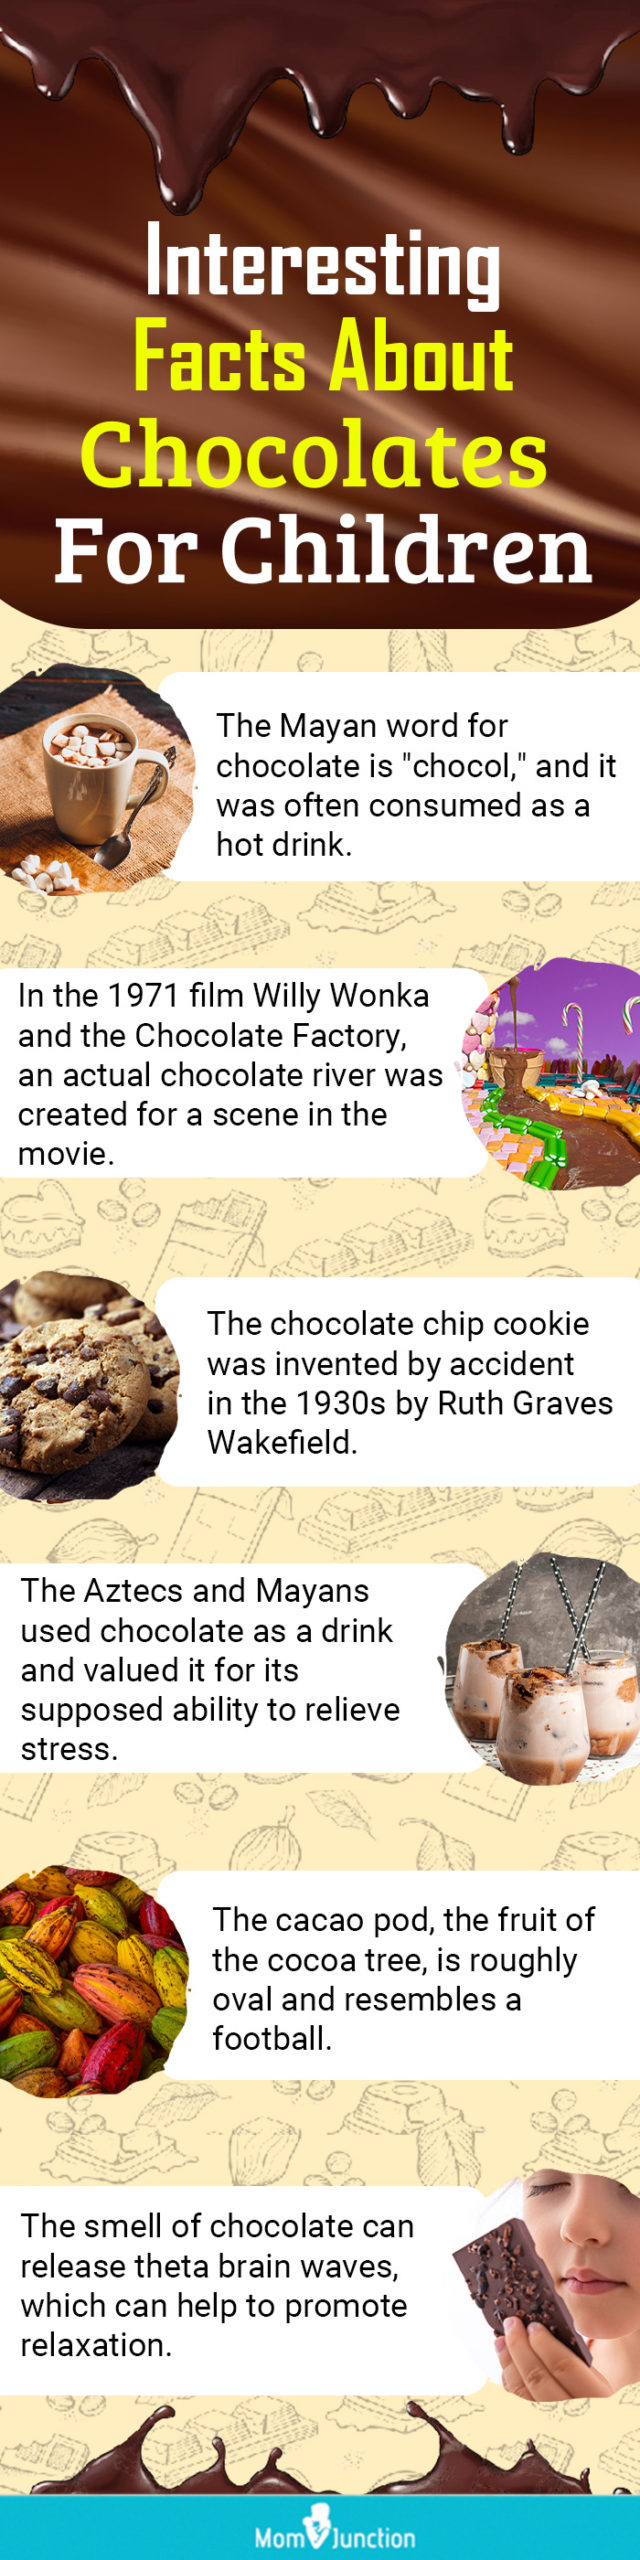 interesting facts about chocolates for children (infographic)